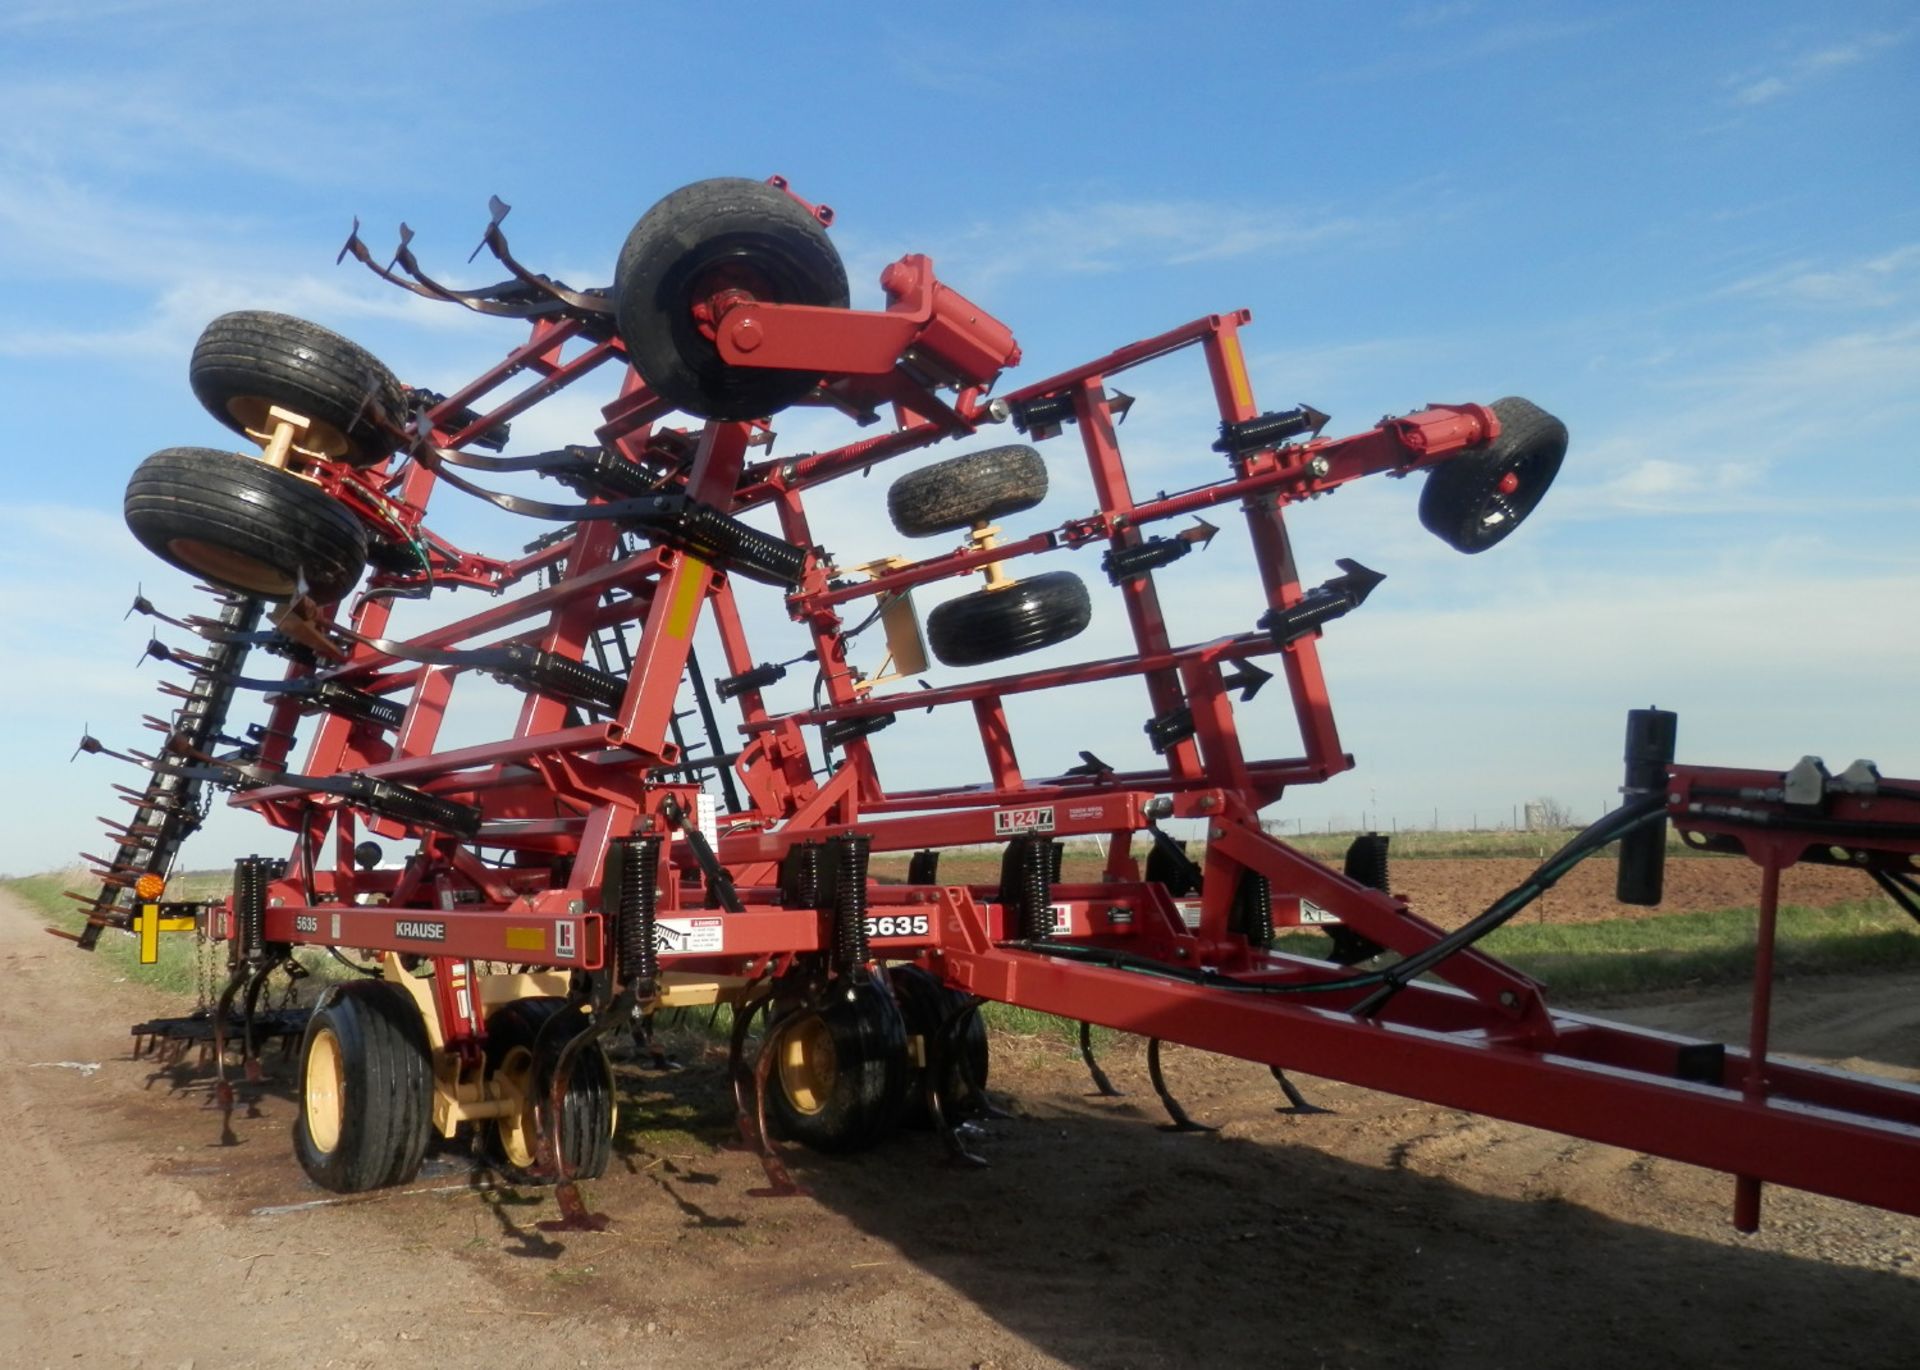 KUHN KRAUSE 5635 24' FIELD CULTIVATOR - Image 2 of 9